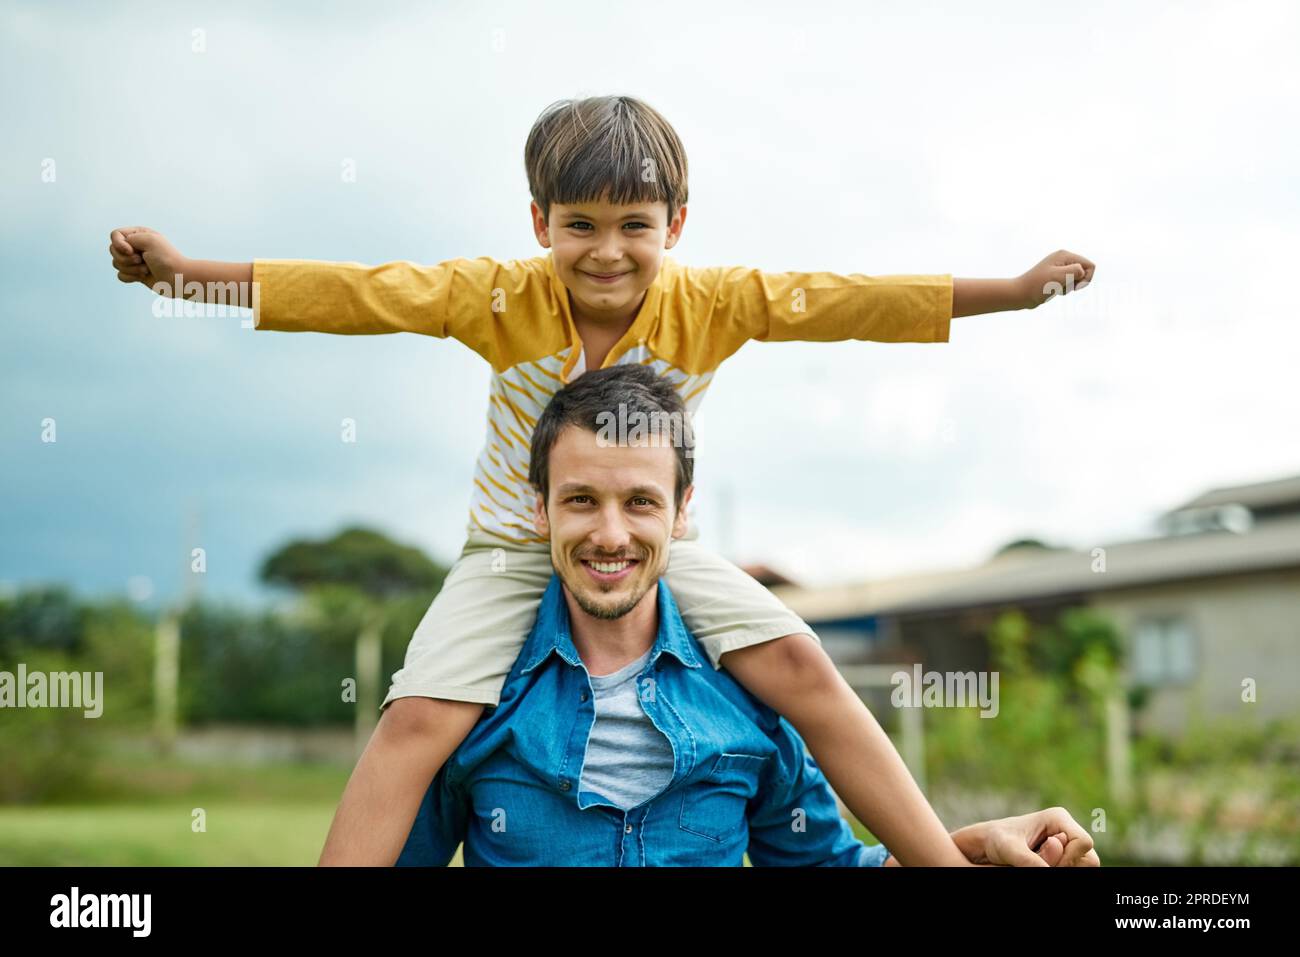 Hes flying high with his poppa. Portrait of a cheerful father carrying his young son on his shoulders outdoors. Stock Photo